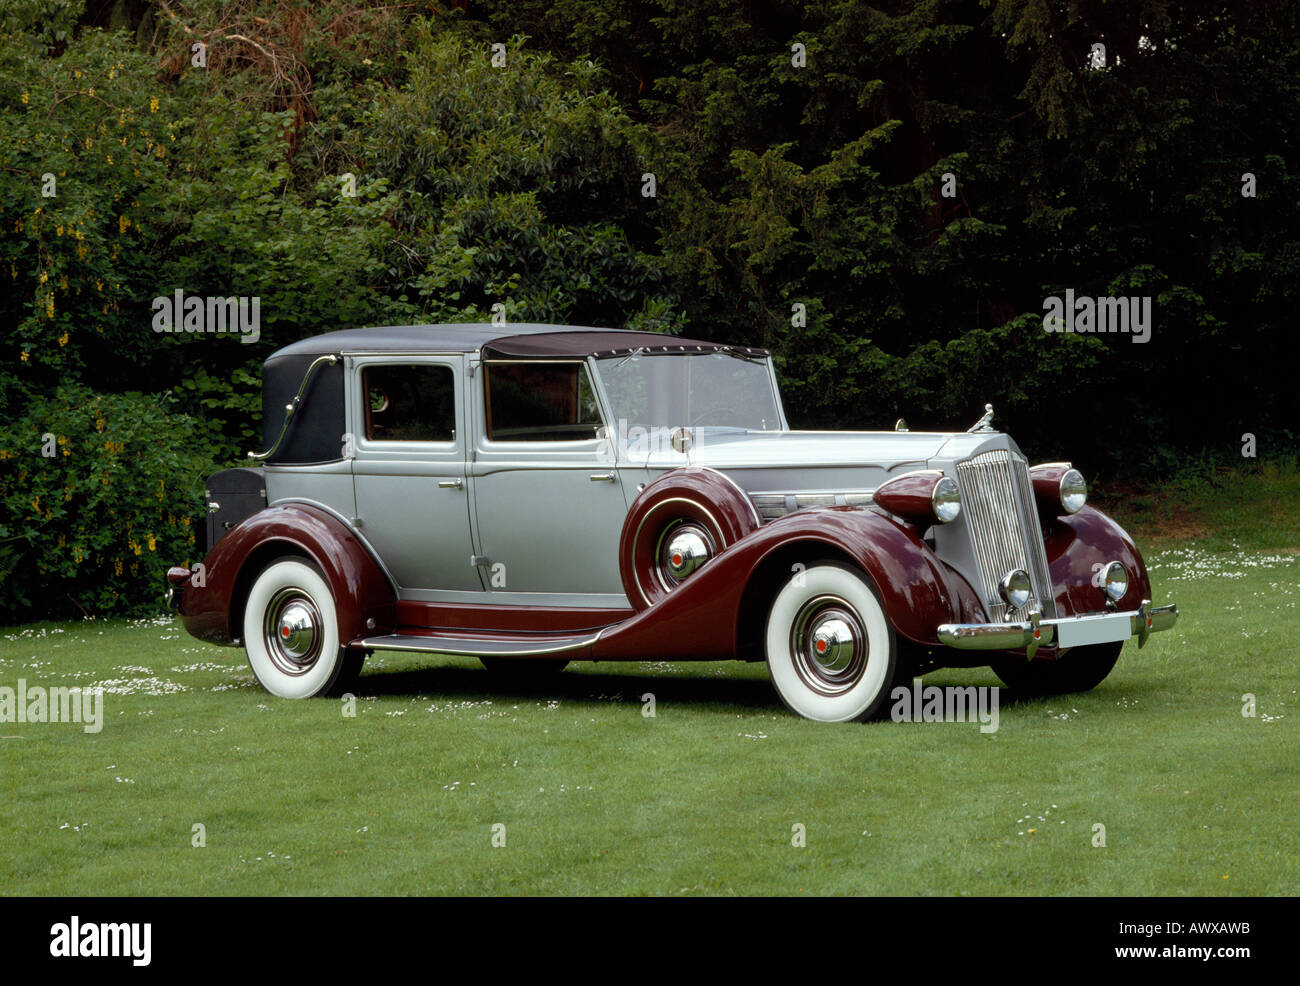 1937 Packard Super Eight 5.2 litre town car. Country of origin USA. Stock Photo